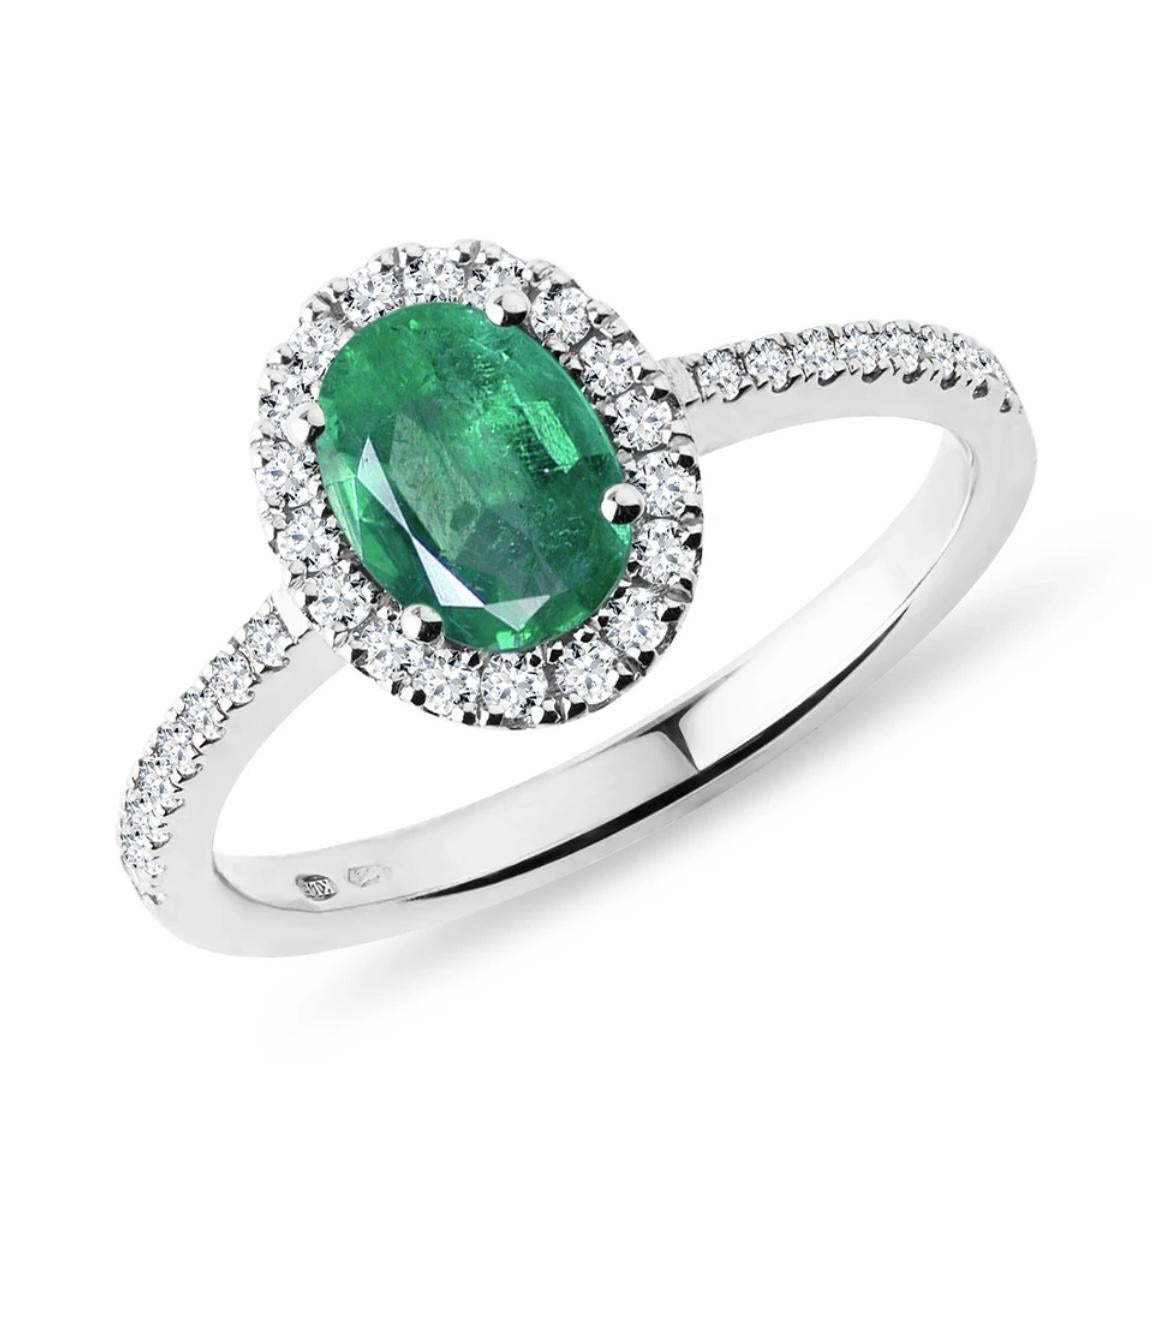 6x8mm Oval Cut Natural Emerald & 1 Ct Natural Diamond Halo Engagement Ring size 6 in 14 K white Gold
Introducing a truly stunning piece, behold the 1.25 Carat Oval Natural Zambian Emerald & 1 ct Diamond Ring in exquisite 14 Karat White Gold. This